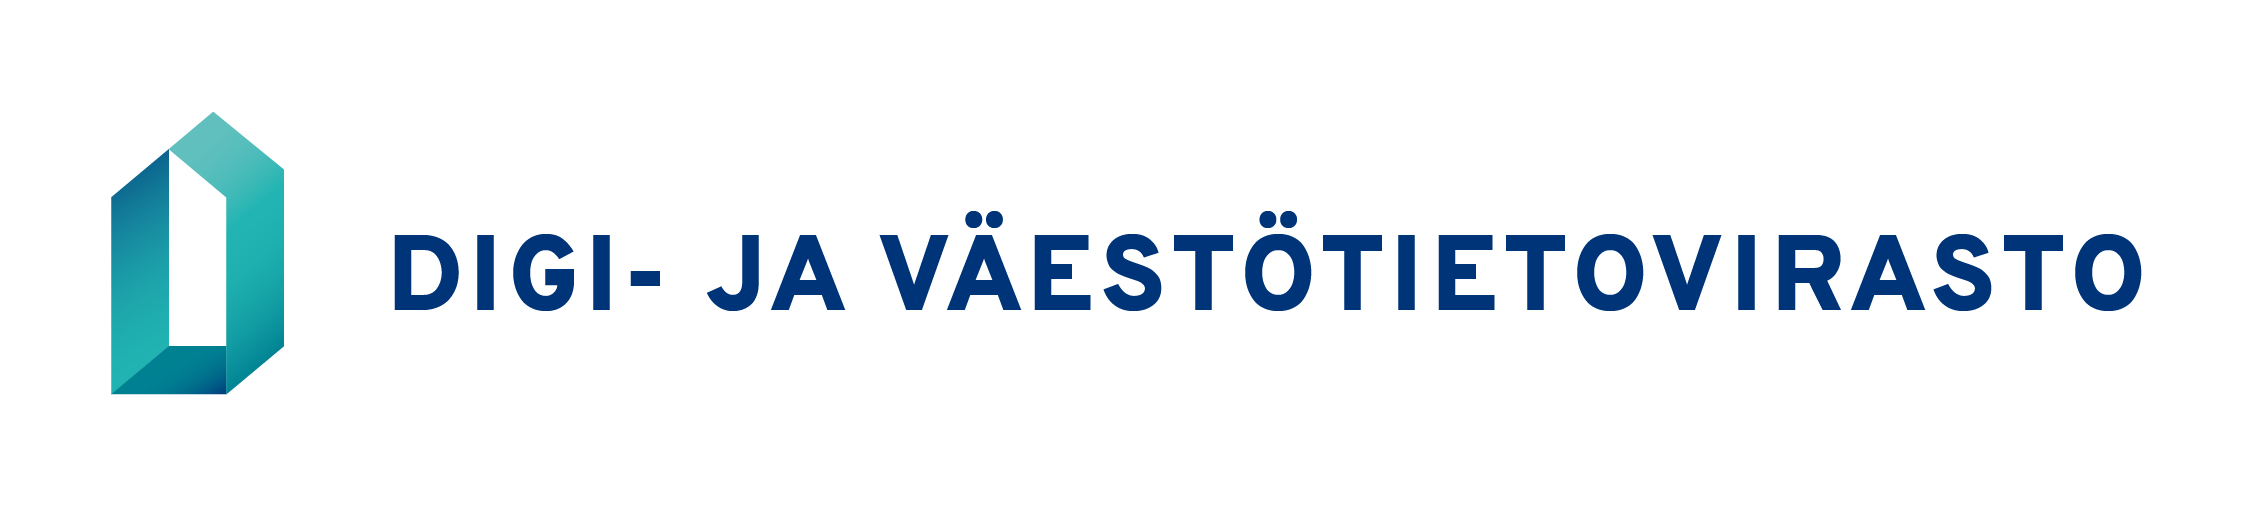 Digital and Population Data Services Agency’s logo in Finnish, horizontal format